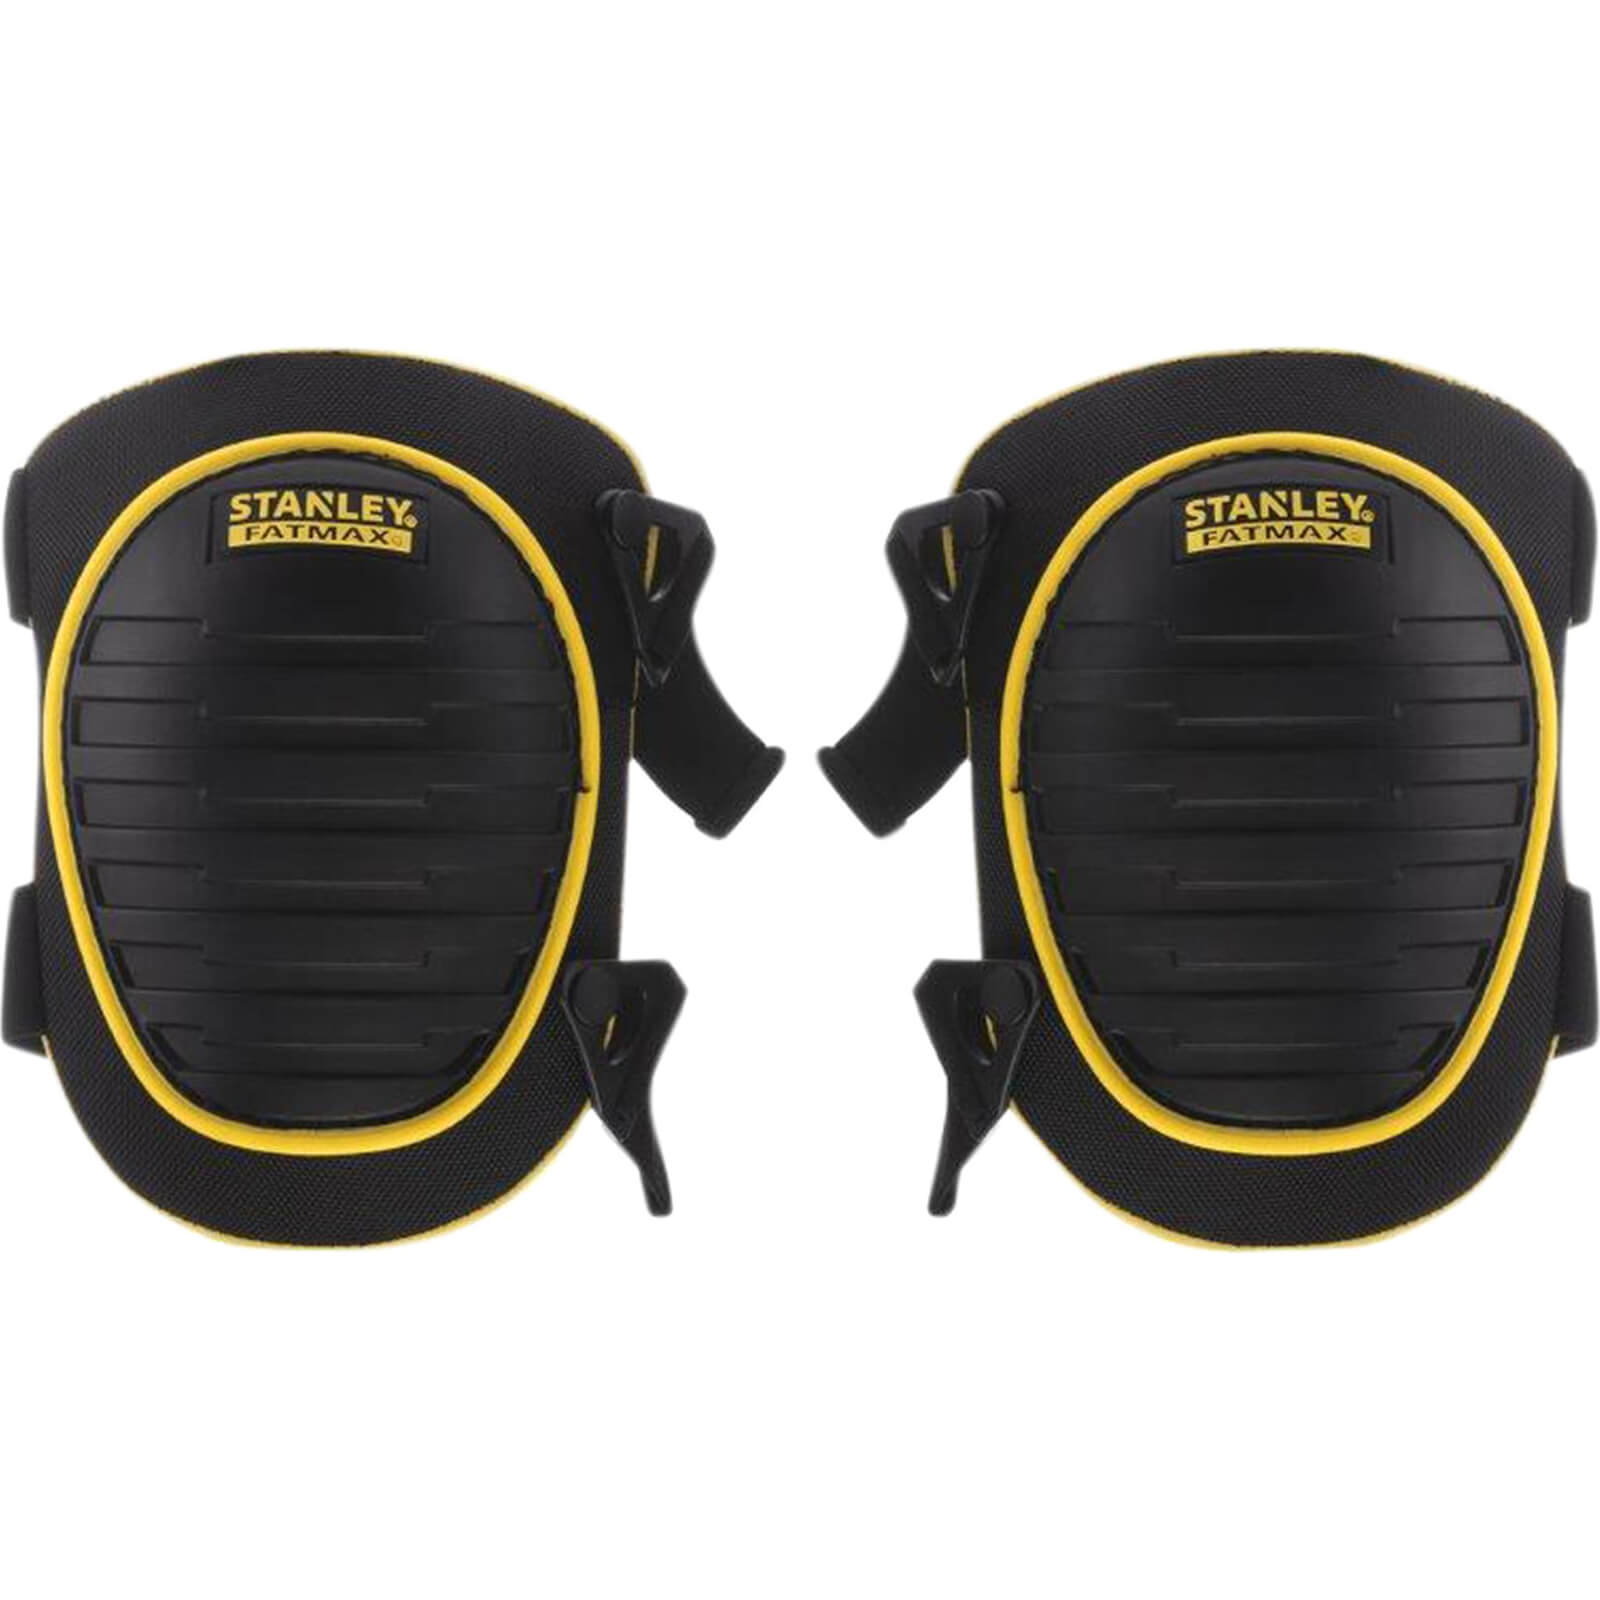 Photo of Stanley Fatmax Hard Shell Tactical Knee Pads